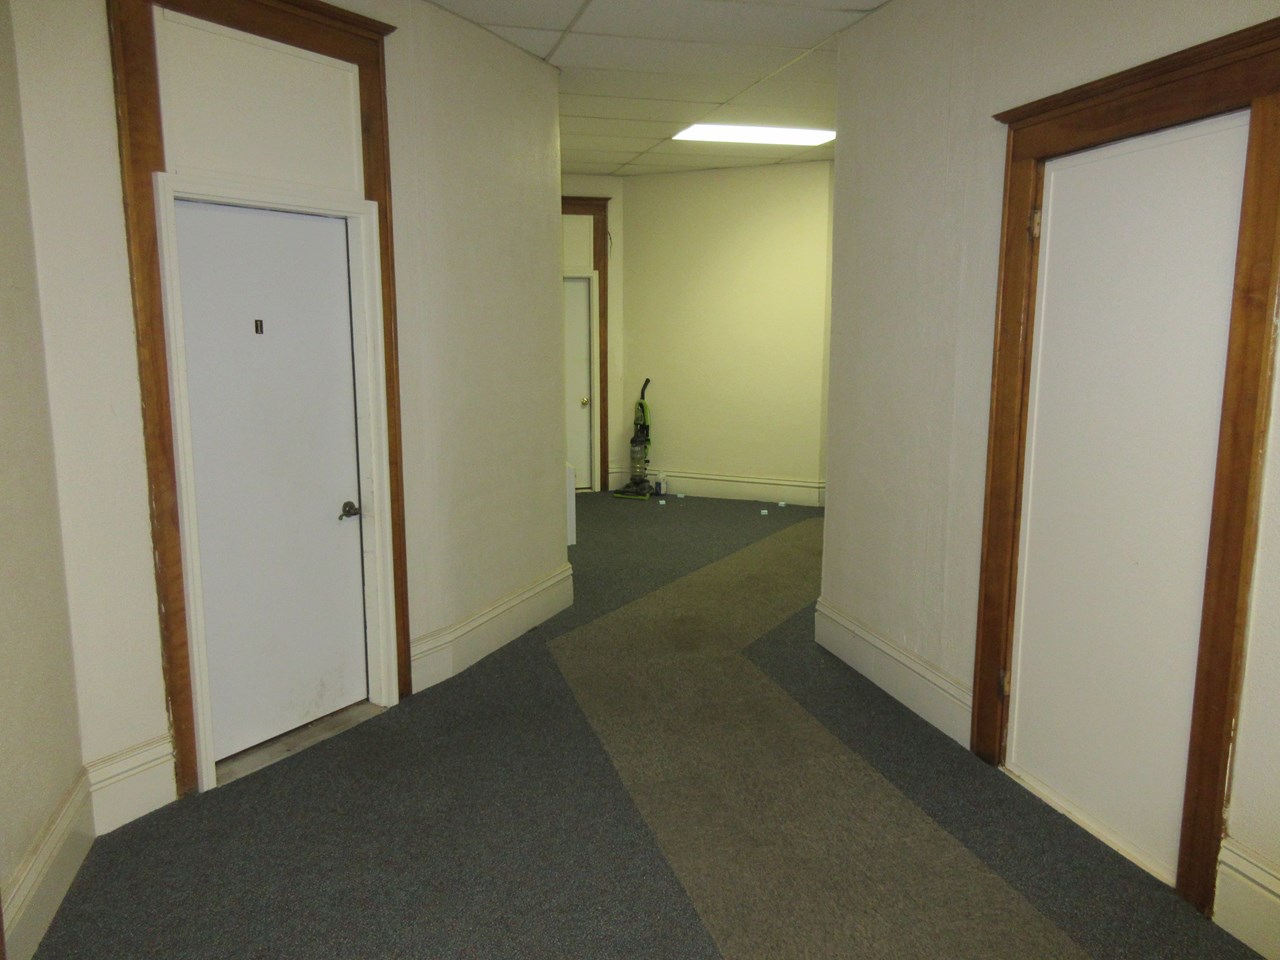 hallway to apartments 1 and 2